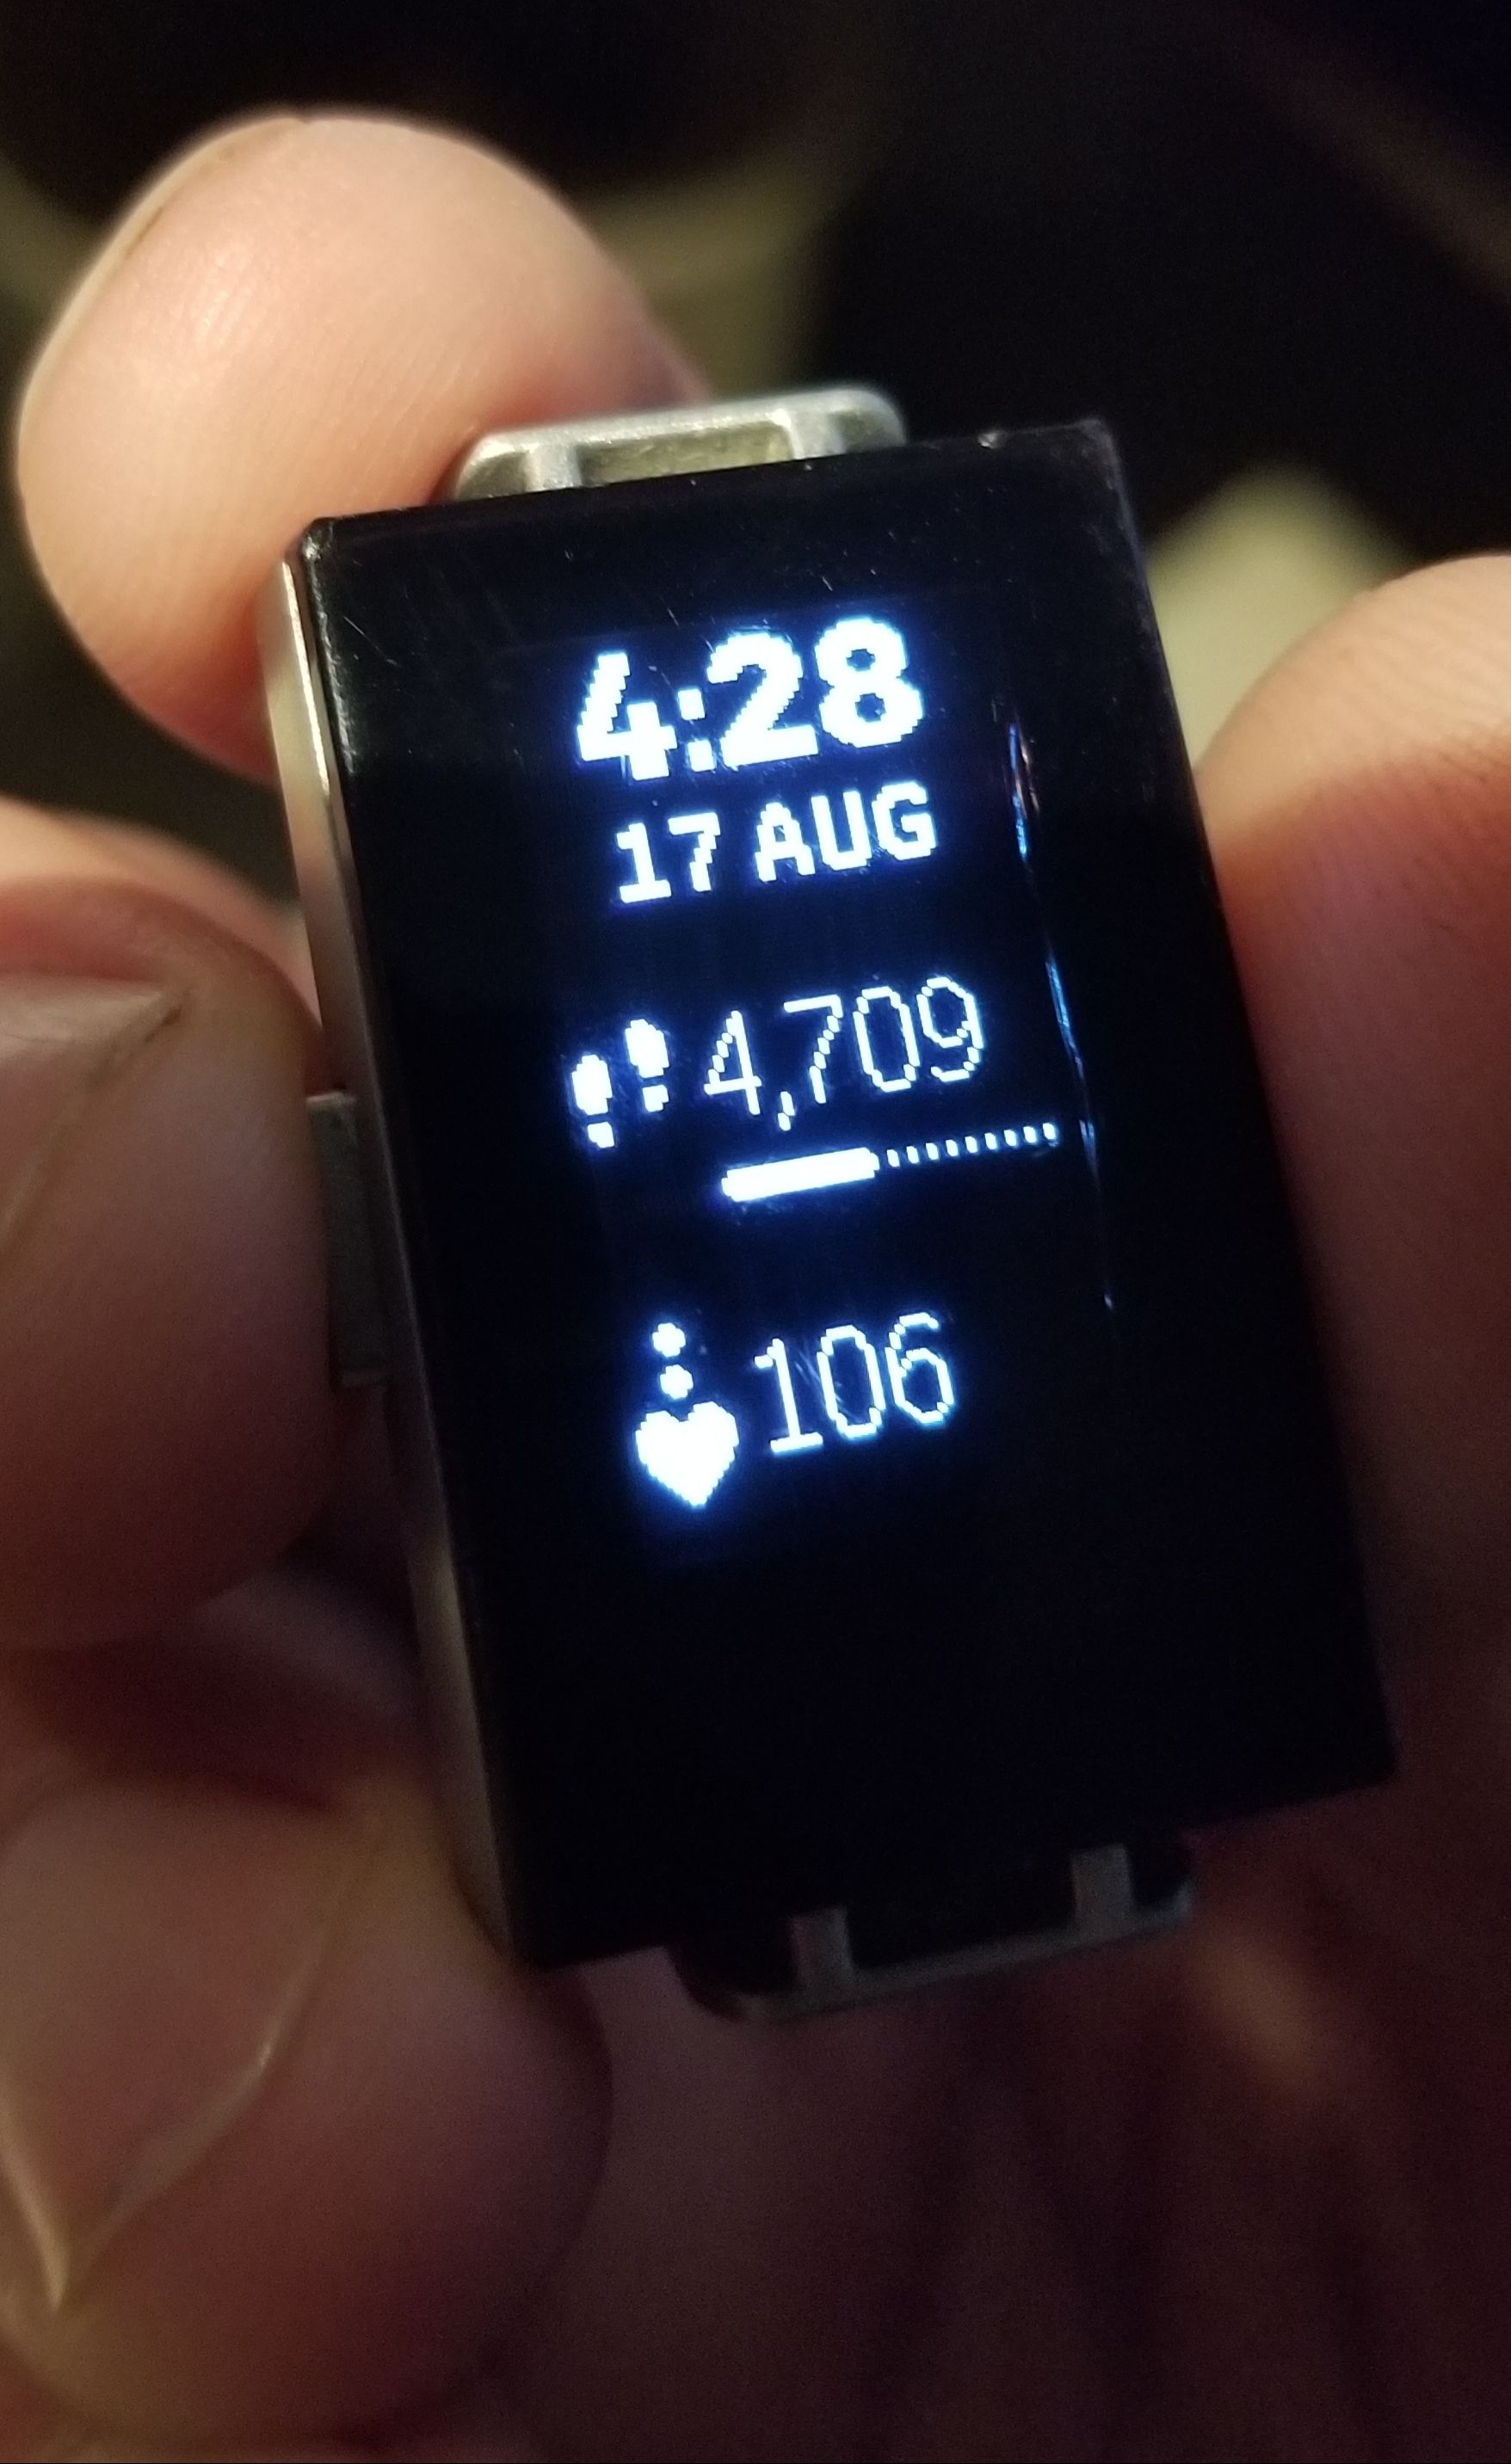 fitbit charge 4 cracked screen